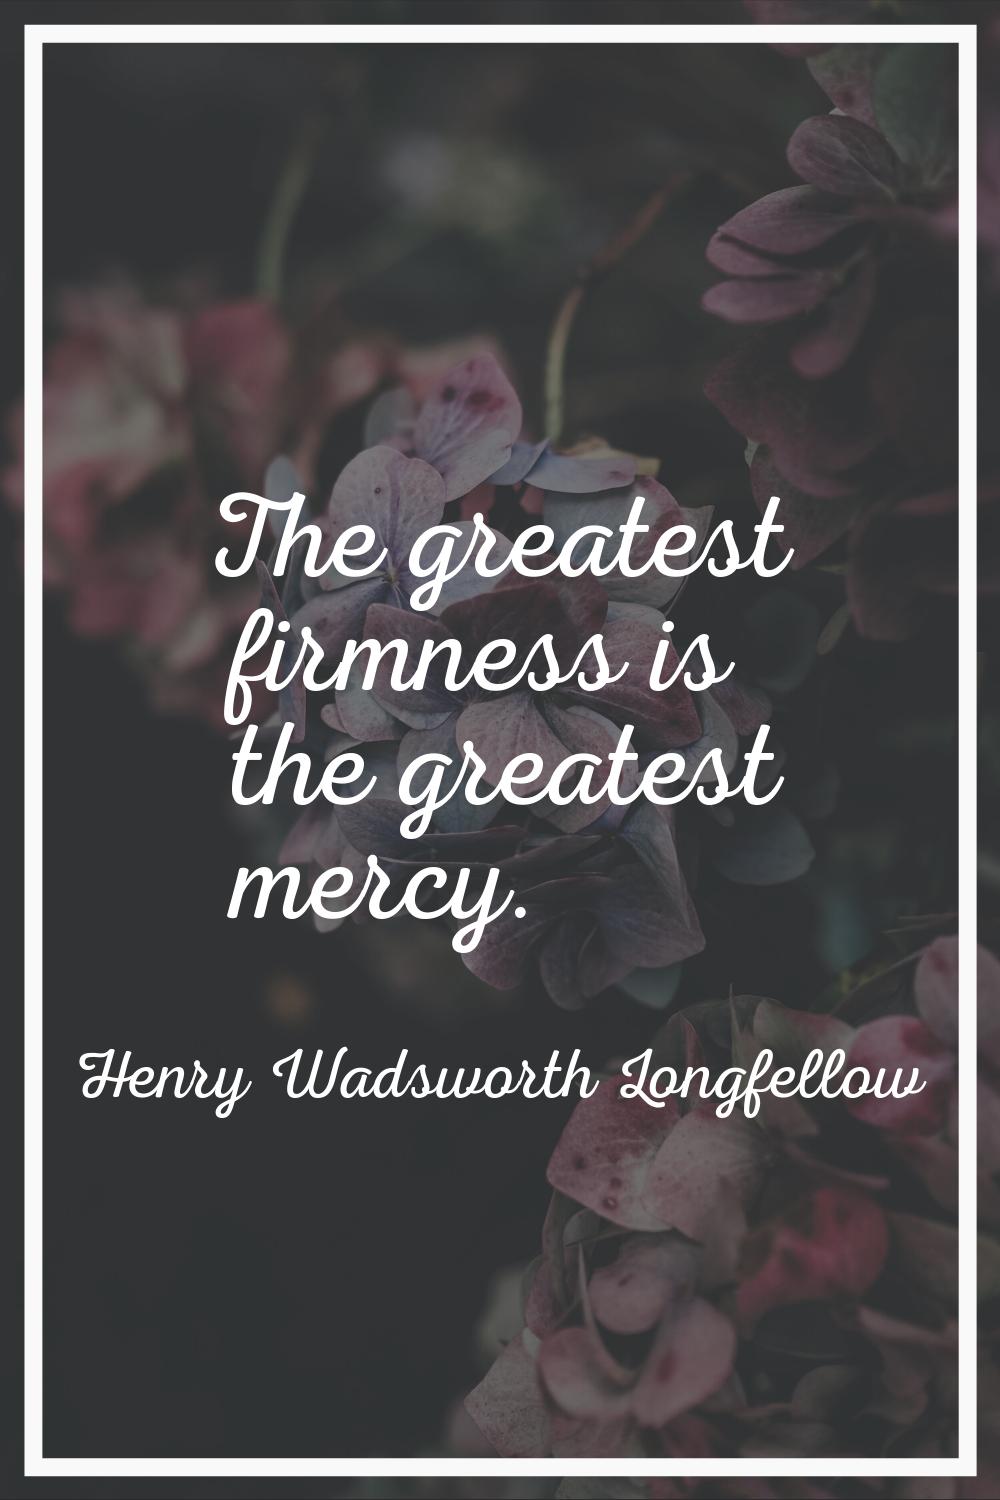 The greatest firmness is the greatest mercy.